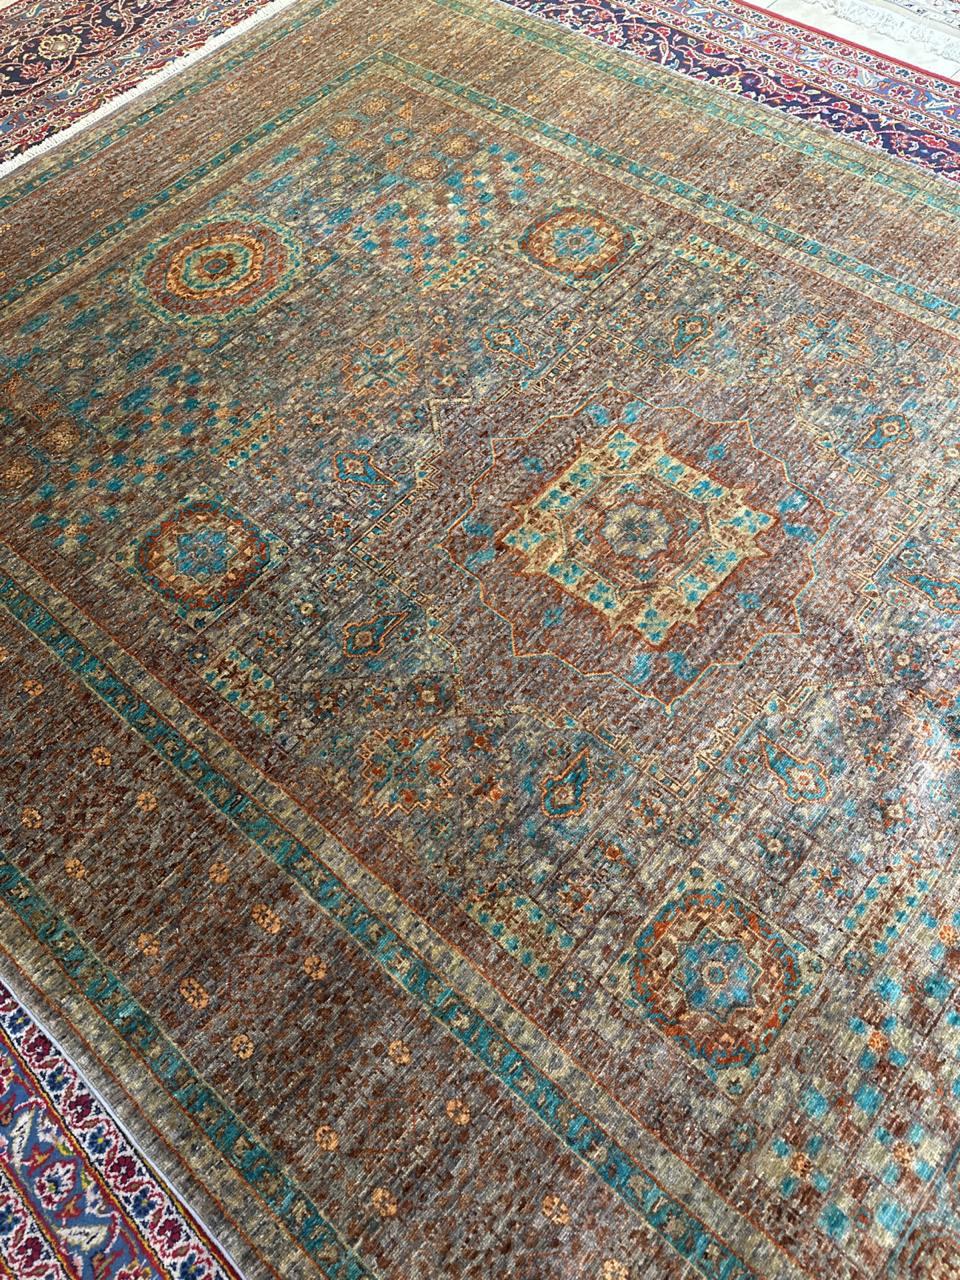 A very unique handmade Wool Rug. This amazing piece is 